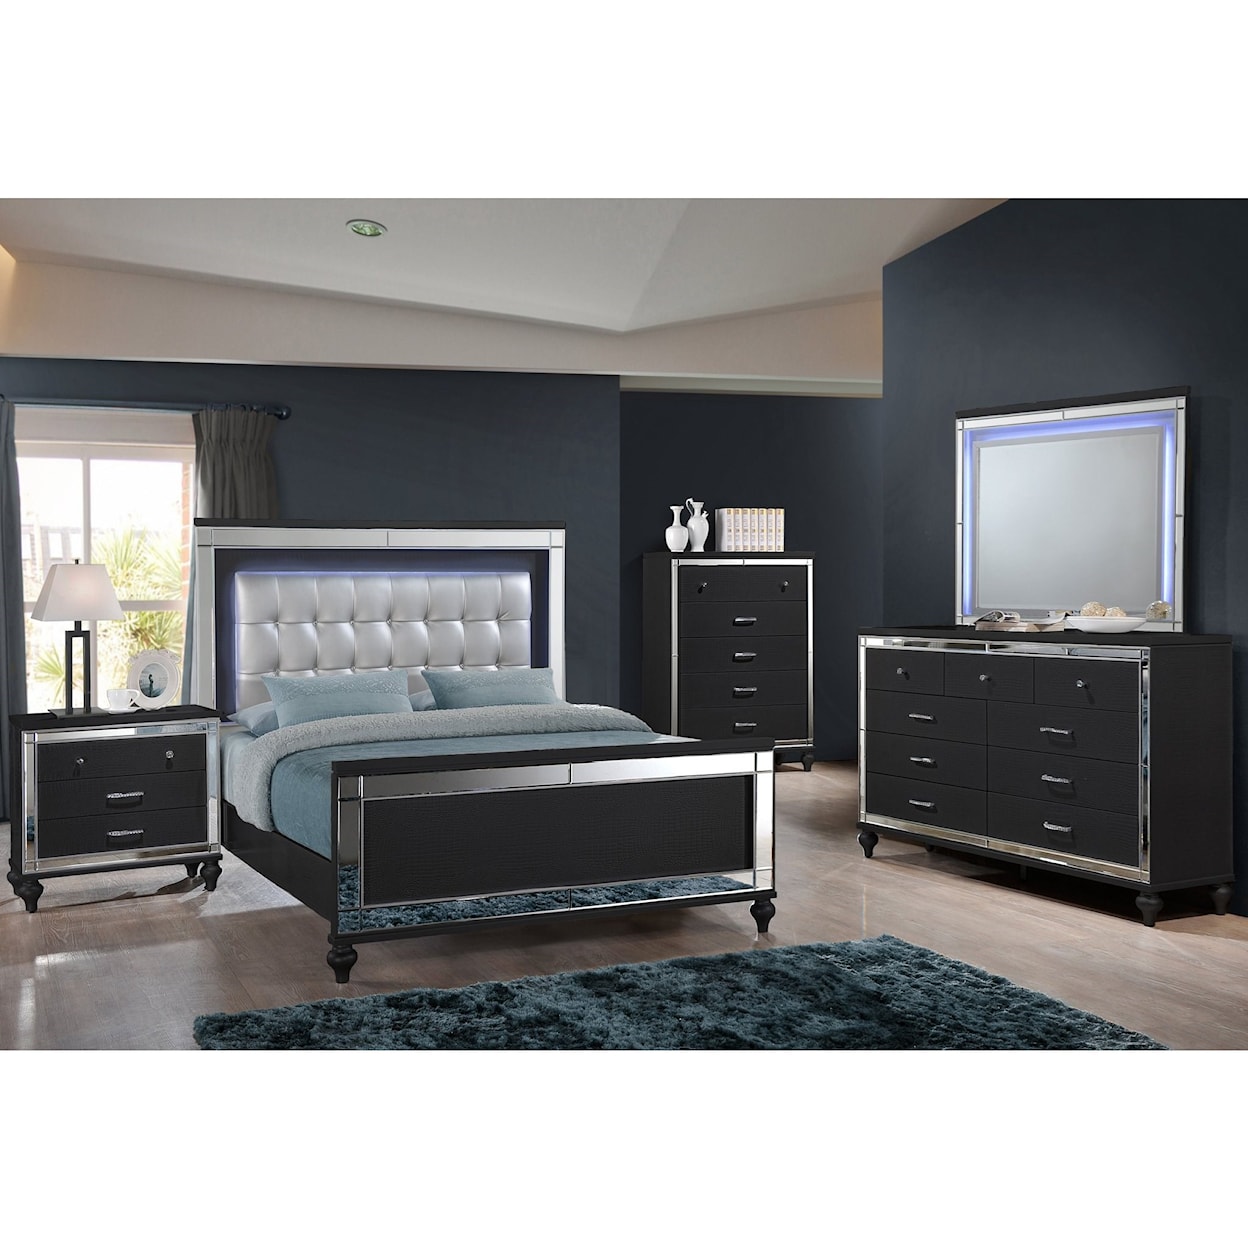 New Classic Valentino California King Bedroom Group